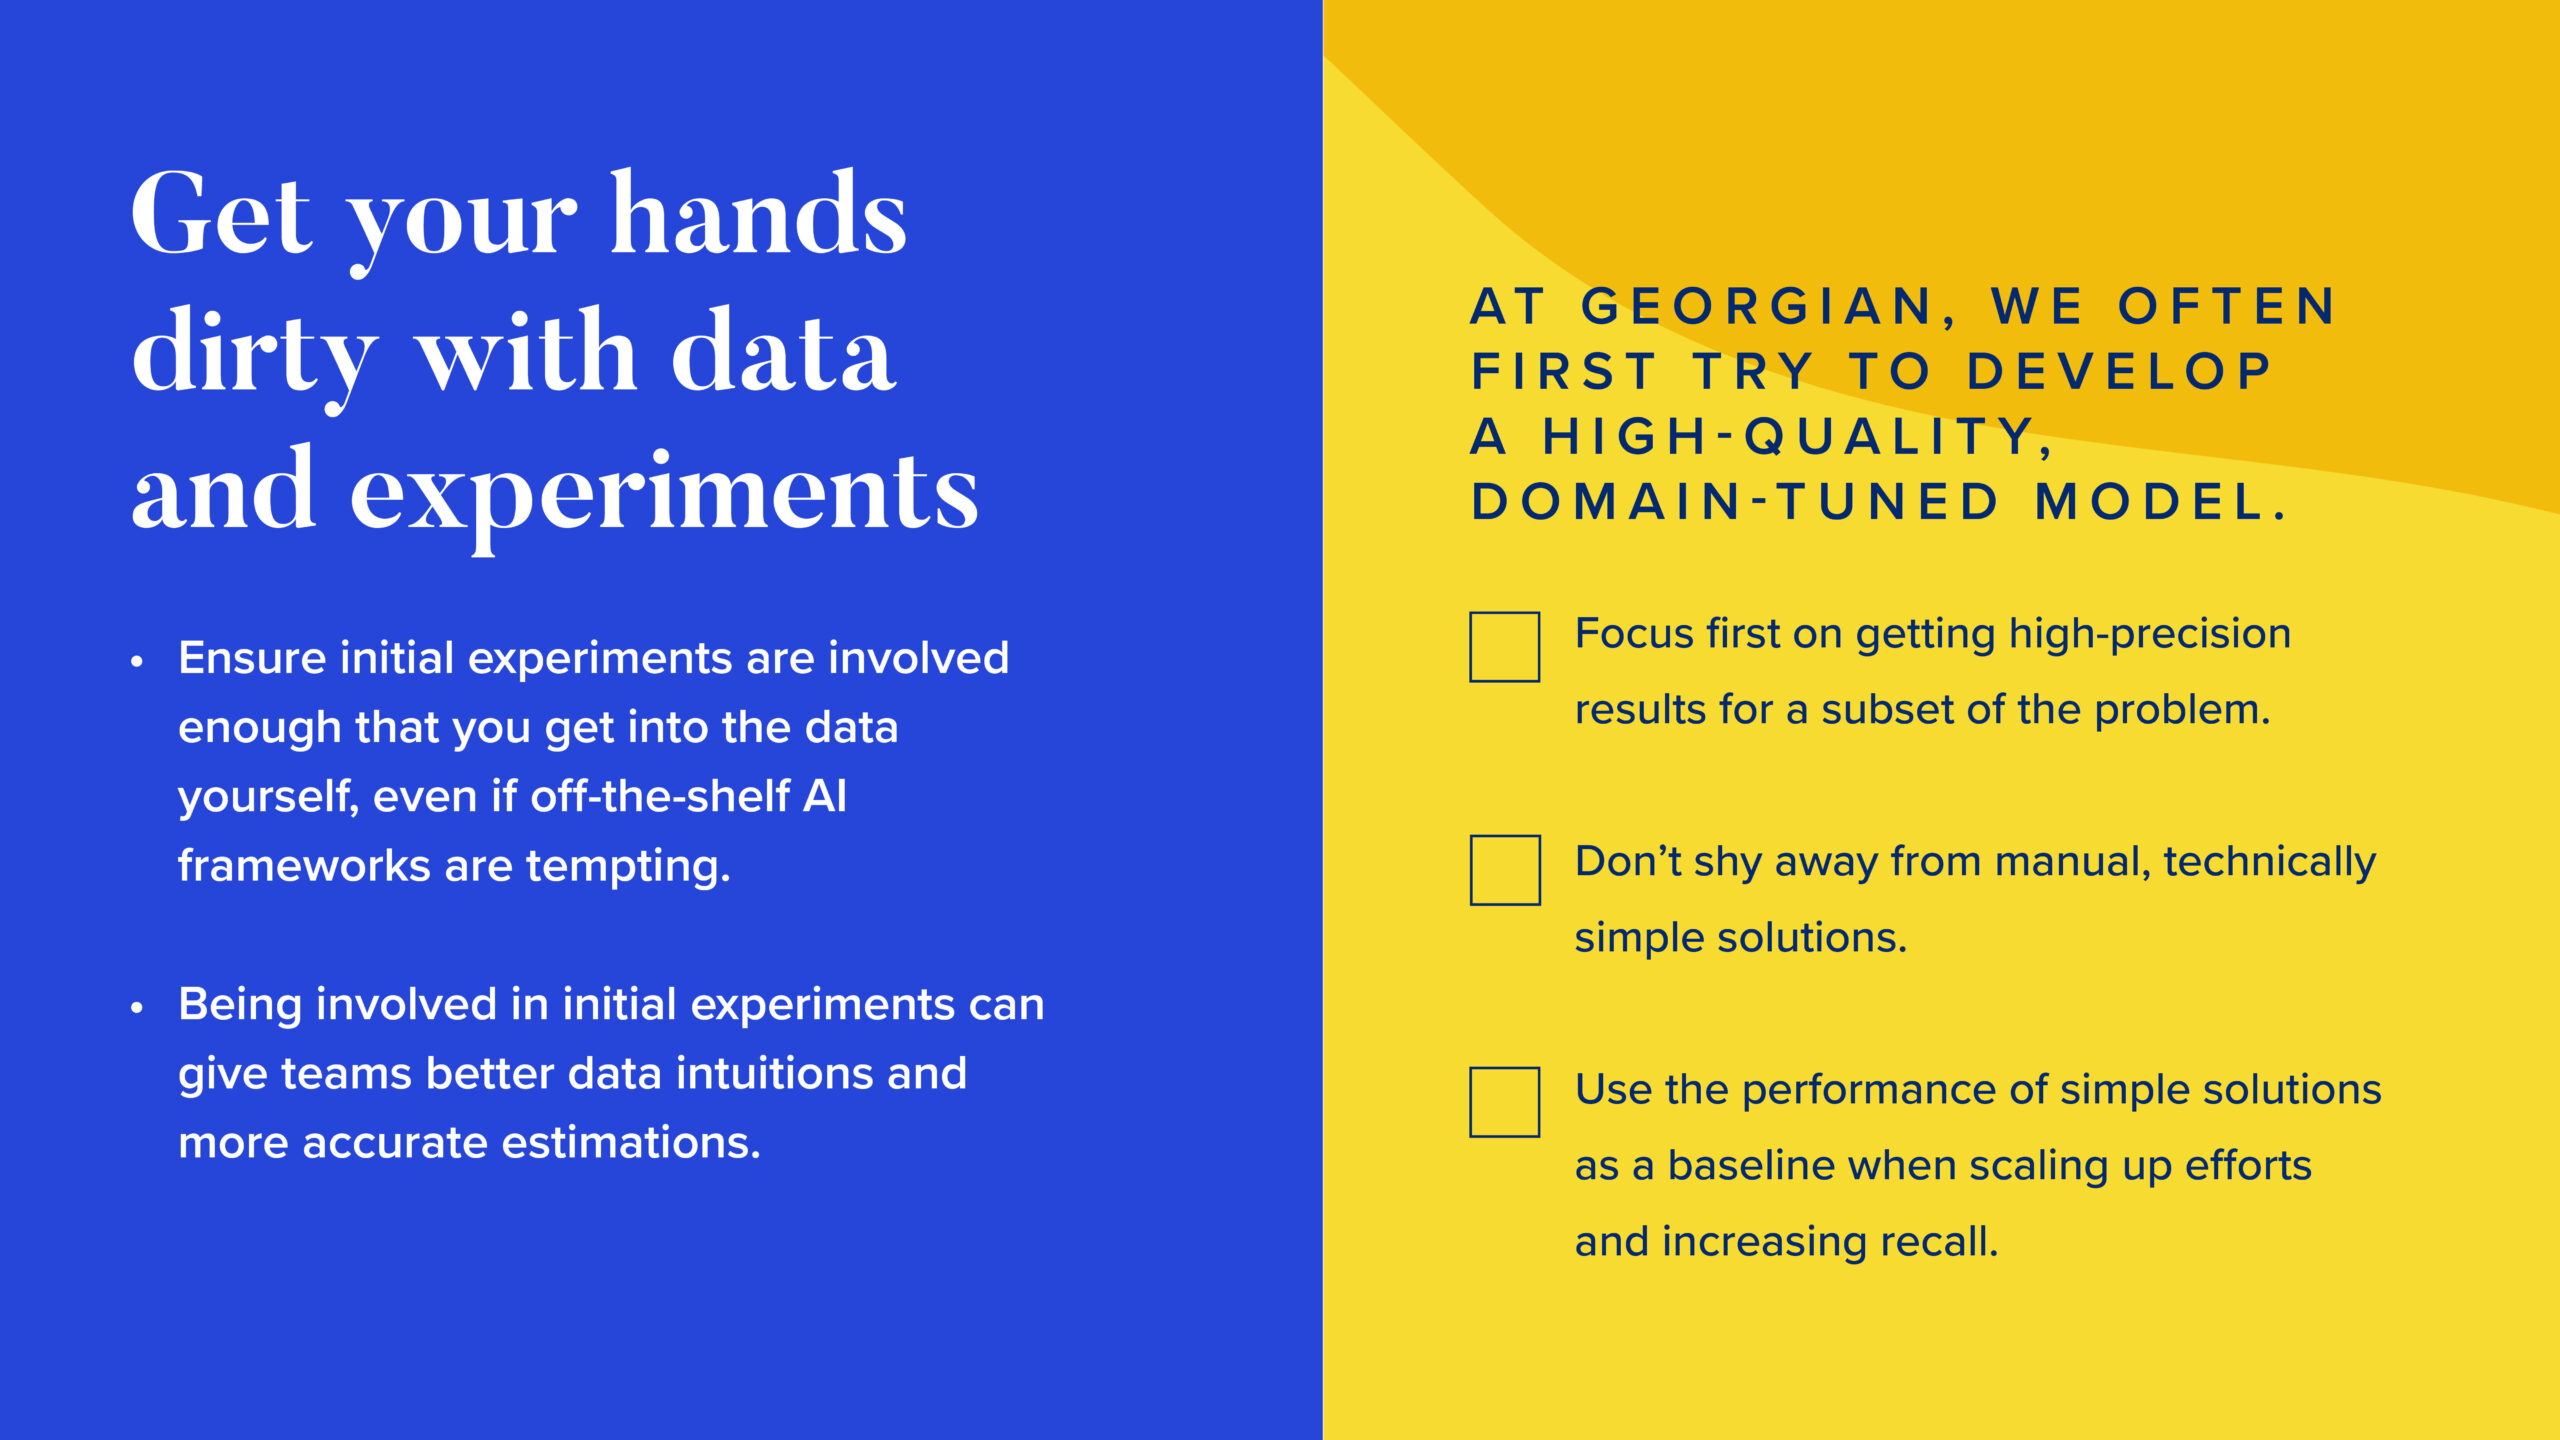 INFOGRAPHIC #1: Get your hands dirty with data and experiments

Left side: 
Ensure initial experiments are involved enough that you get into the data yourself, even if off-the-shelf AI frameworks are tempting.
Being involved in initial experiments can give teams better data intuitions and more accurate estimations.

Right side: 

At Georgian, we often first try to develop a high-quality, domain-tuned model.

Focus first on getting high precision results for a subset of the problem.
Don’t shy away from manual, technically simple solutions.
Use the performance of simple solutions as a baseline when scaling up efforts and increasing recall.
